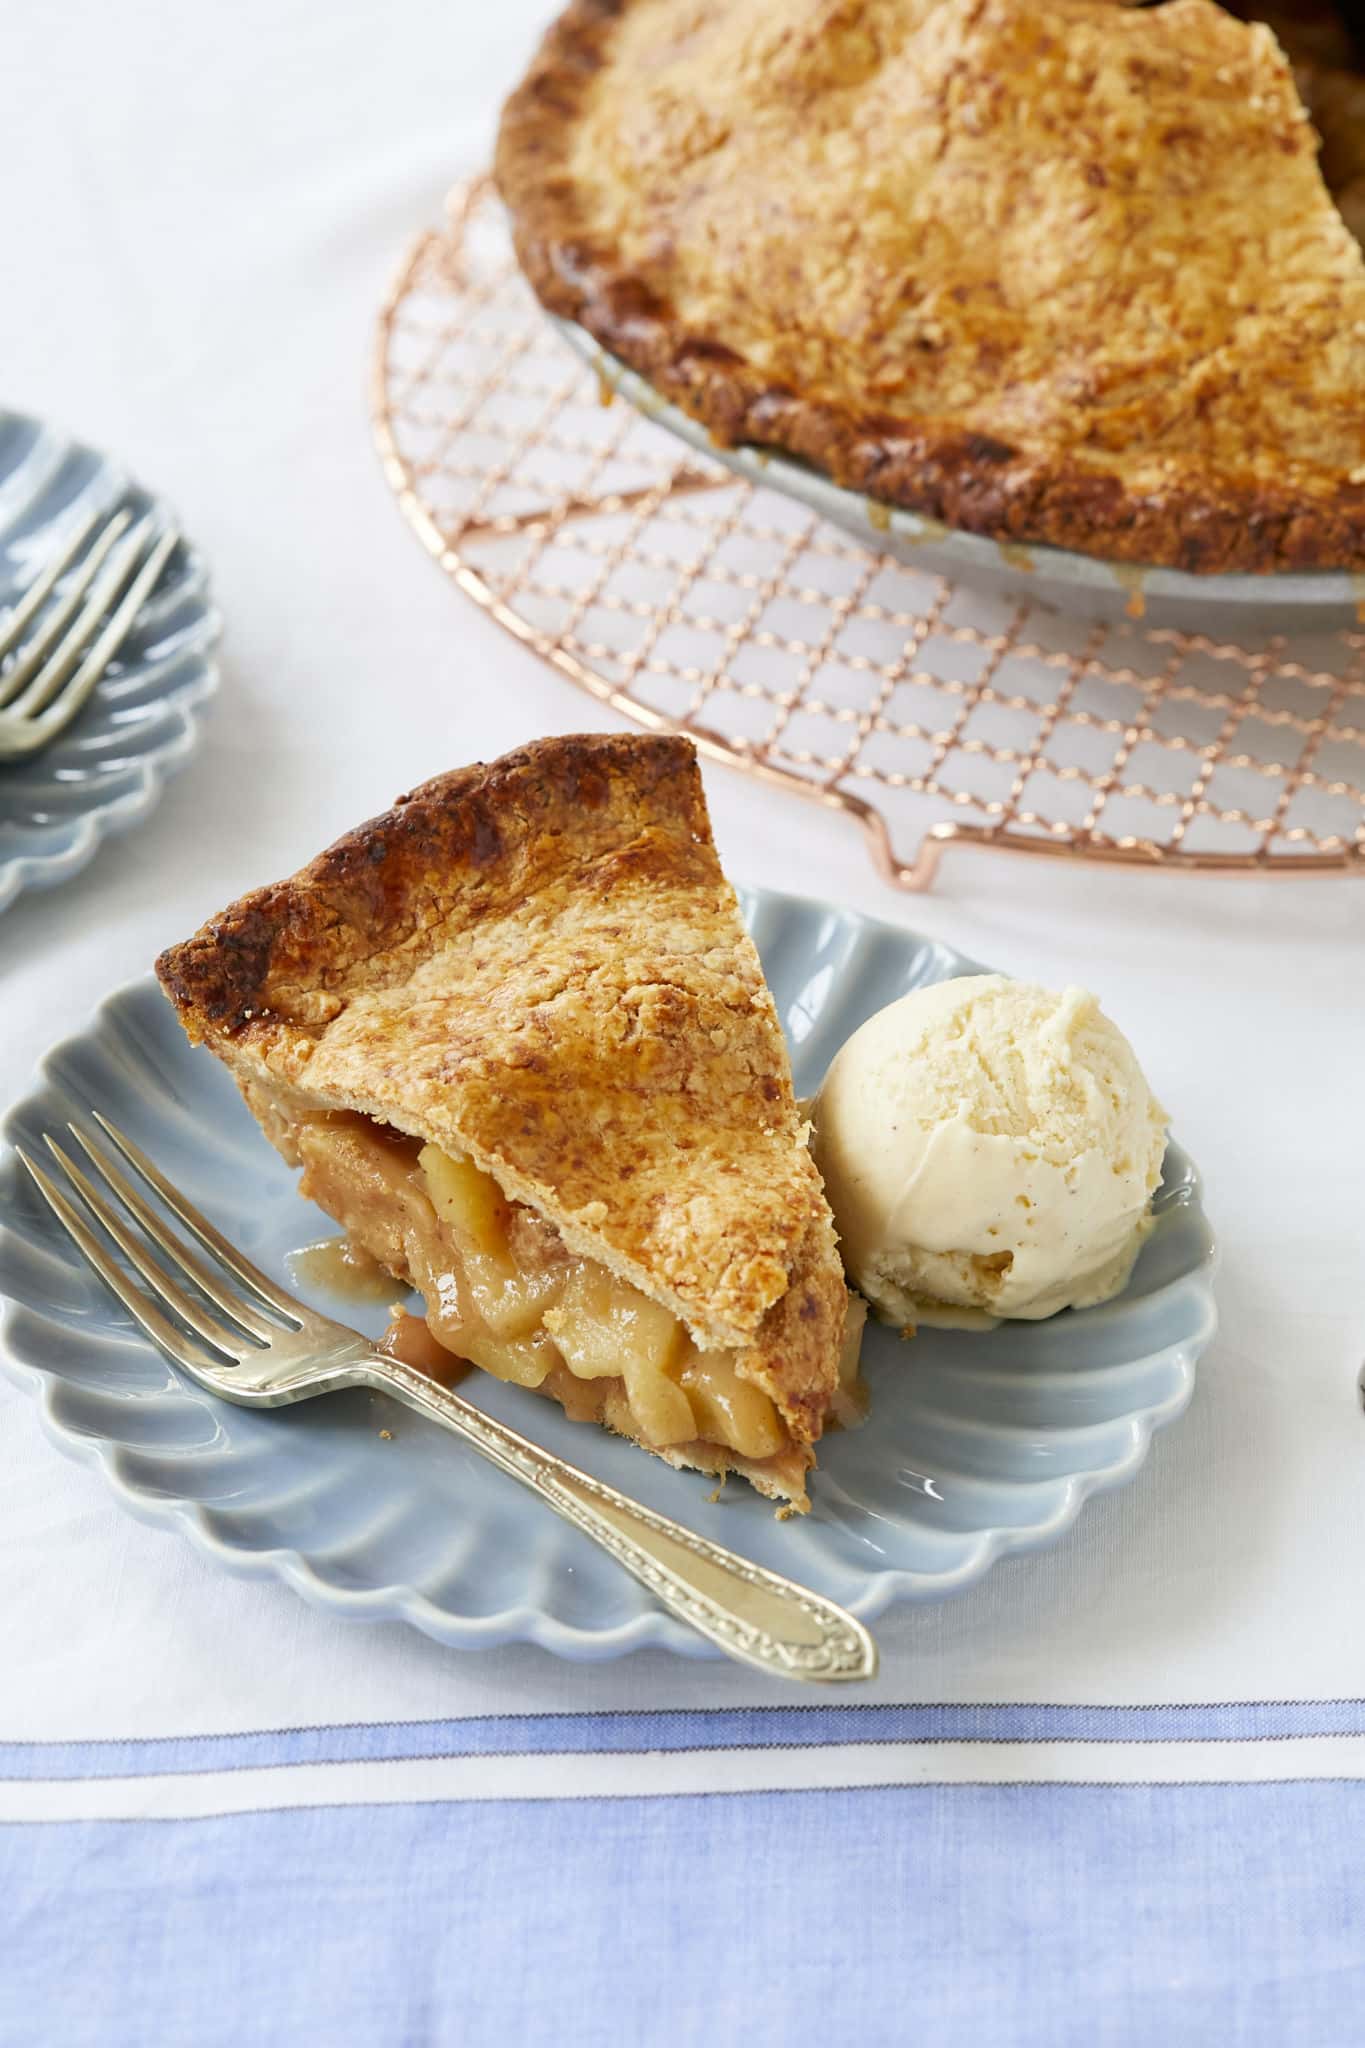 Warm apple pie filling is topped with a buttery crust, flecked with cheddar cheese.